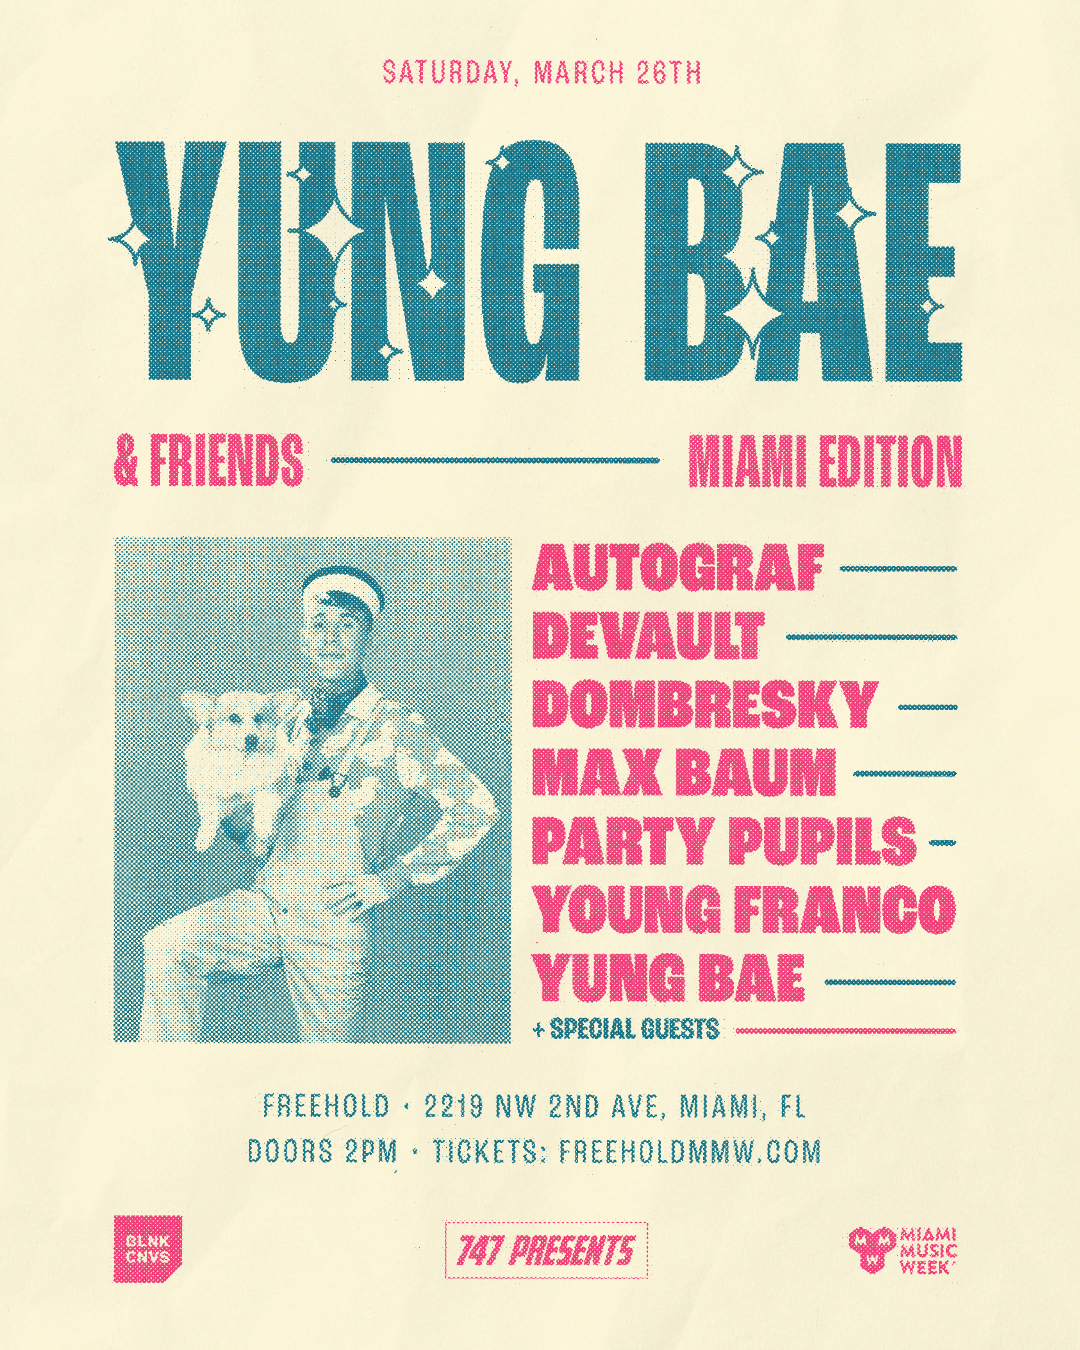 YUNG BAE and Friends Image